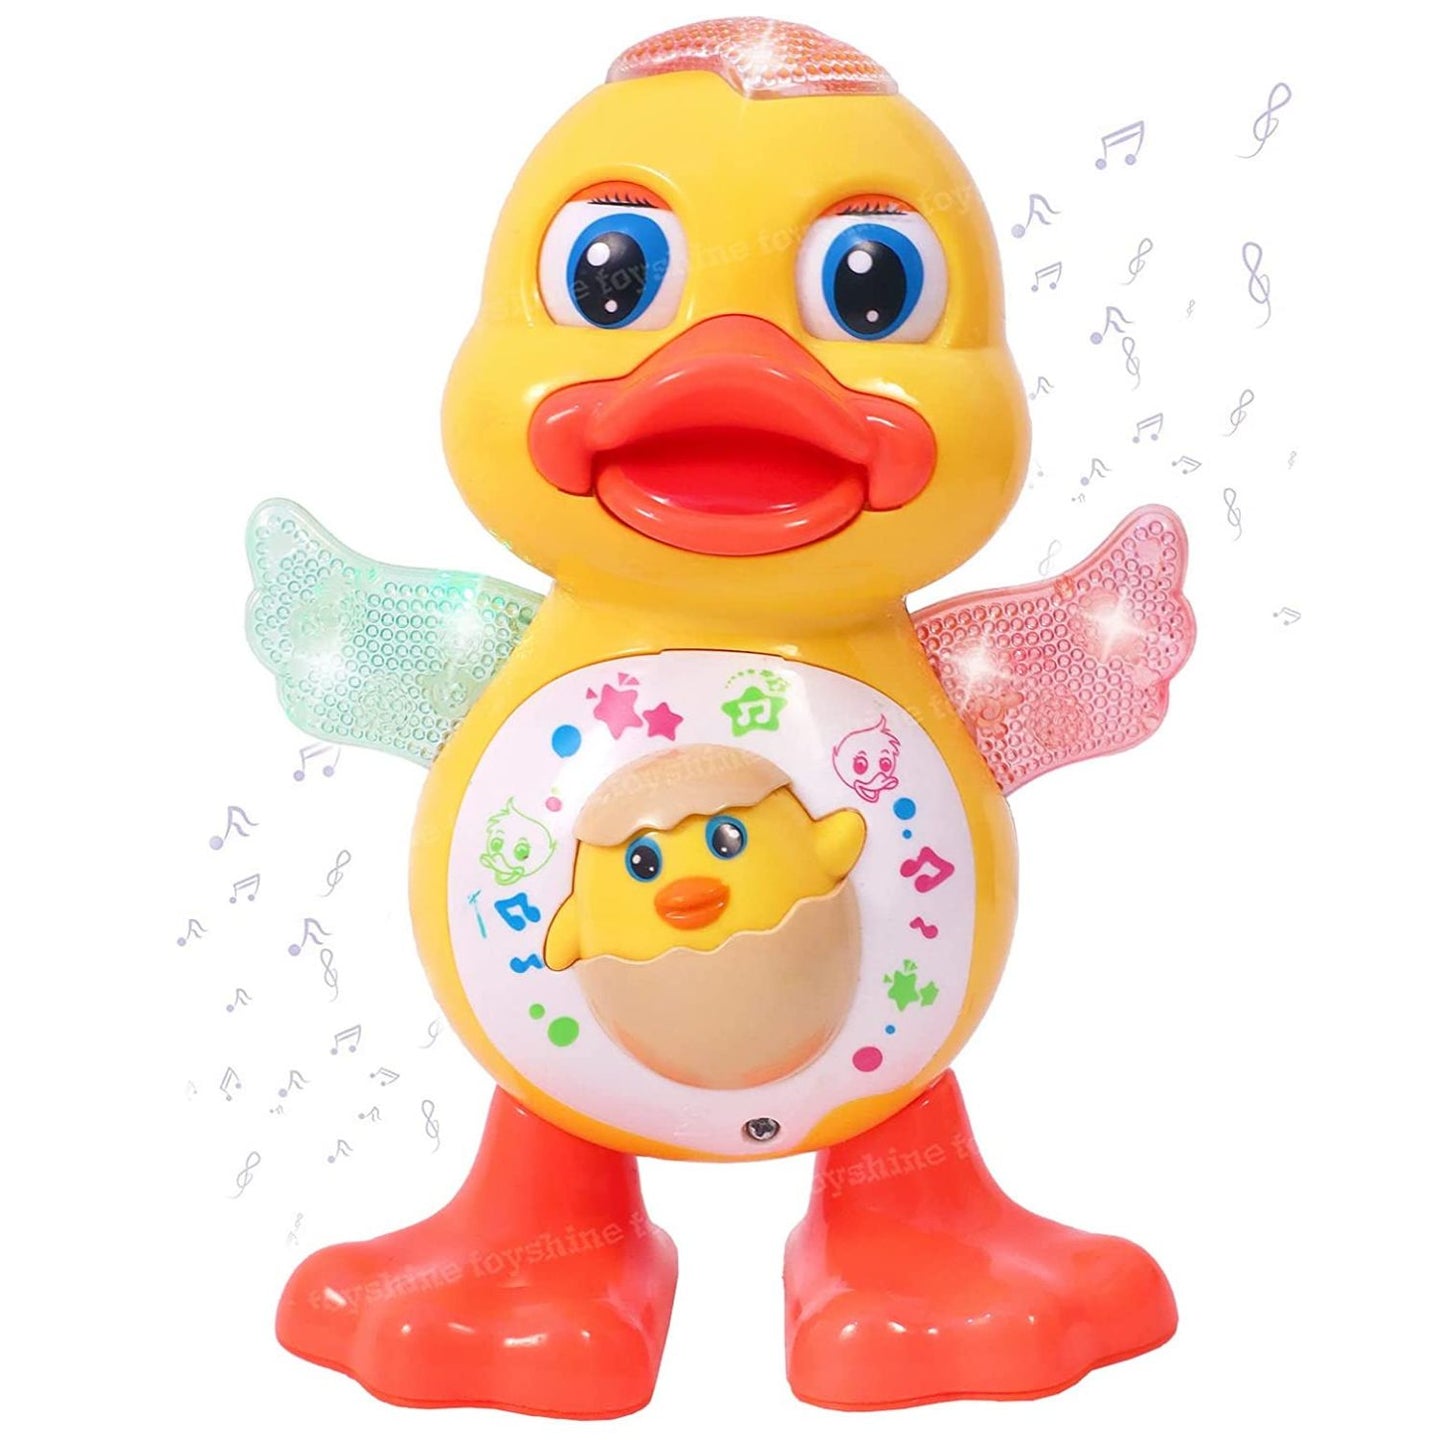 MM TOYS Dancing Duck Toy: Musical Play, Flashing Lights & Real Dancing Action, Ideal Fun for Toddlers - Multicolor